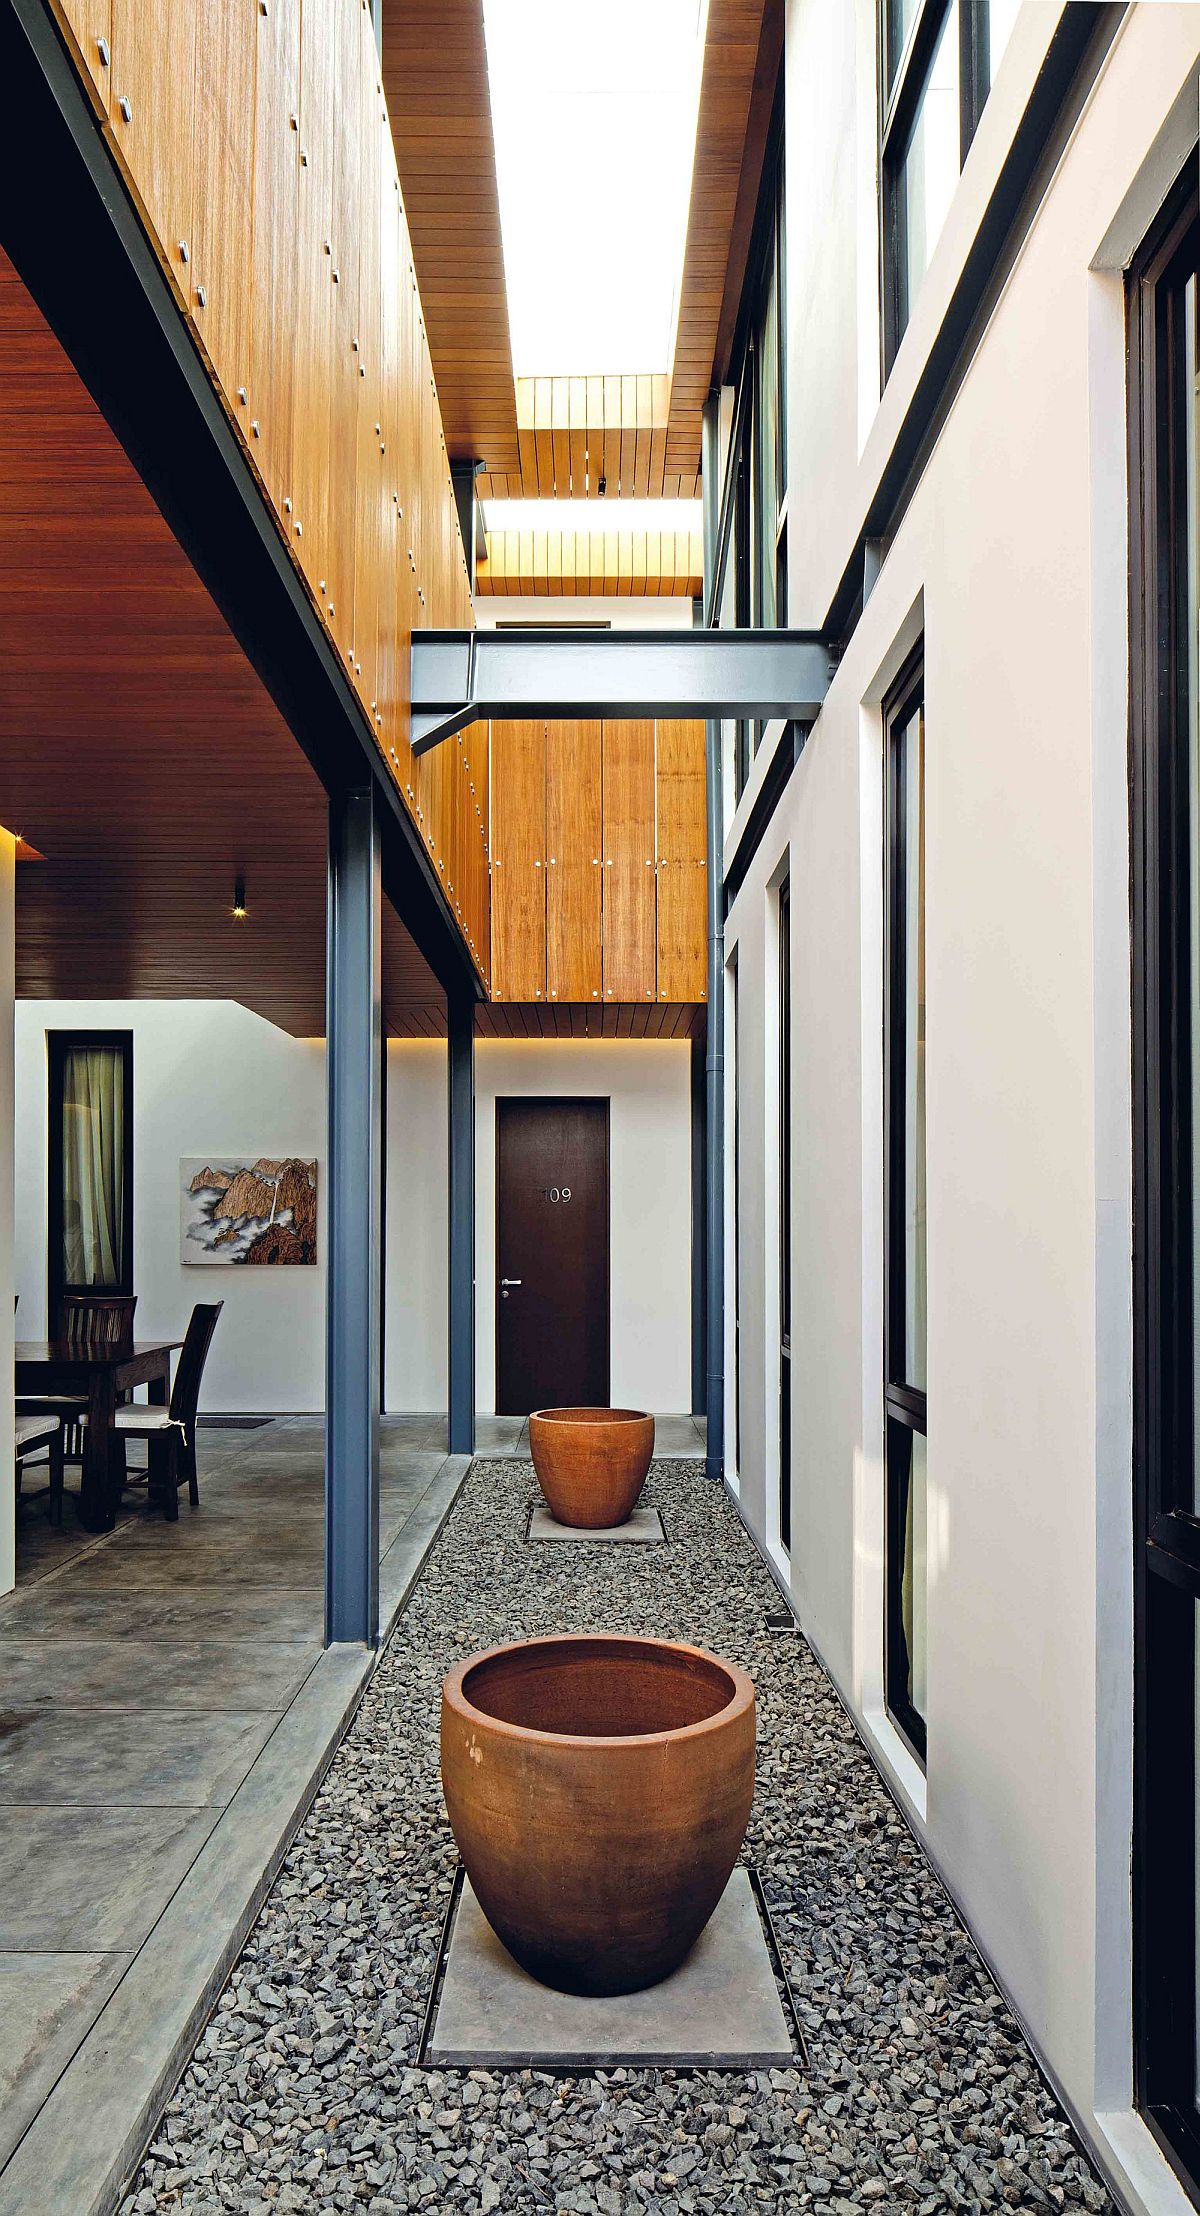 Long corridors and indoor courtyards bring ventilation into all the bedrooms